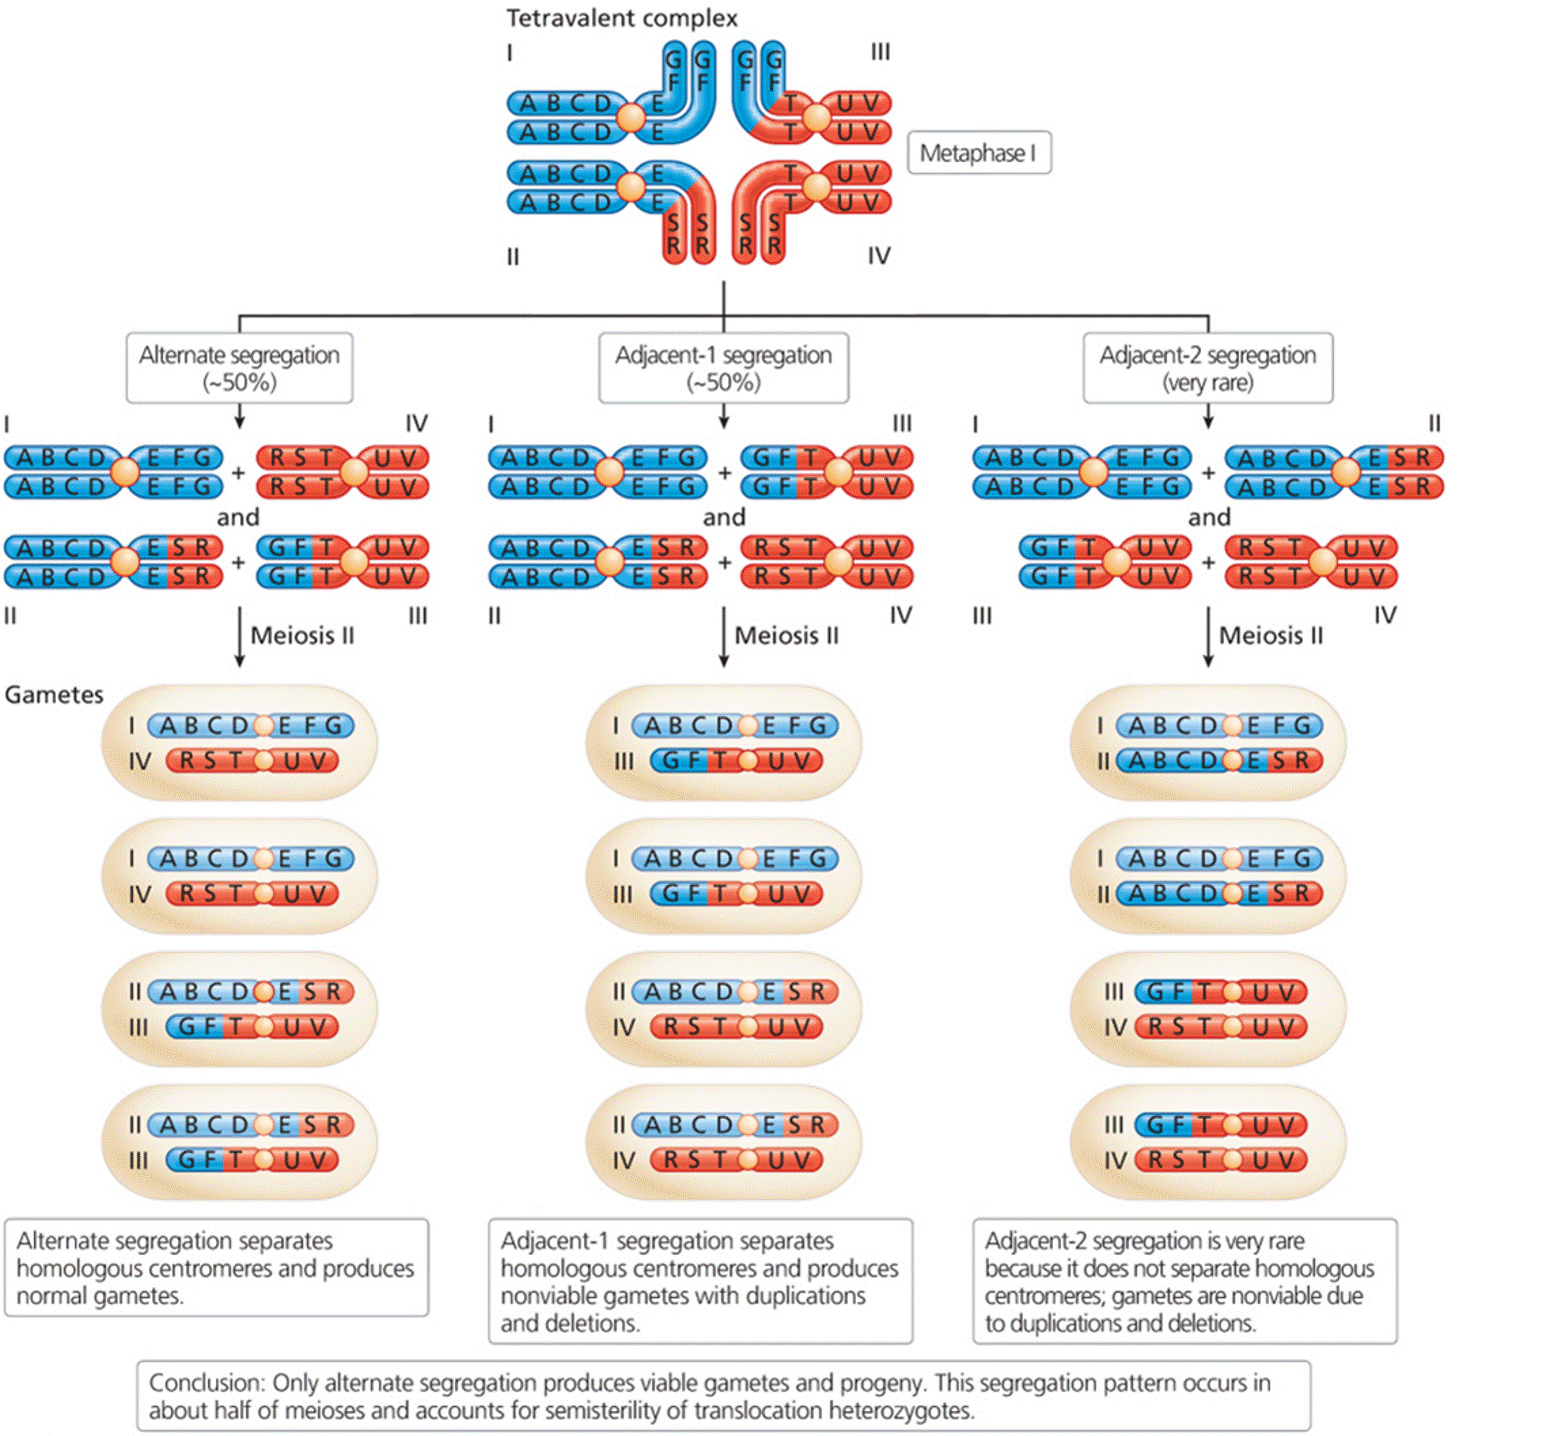 The tetravalent synaptic structure and alternate and adjacent chromosome